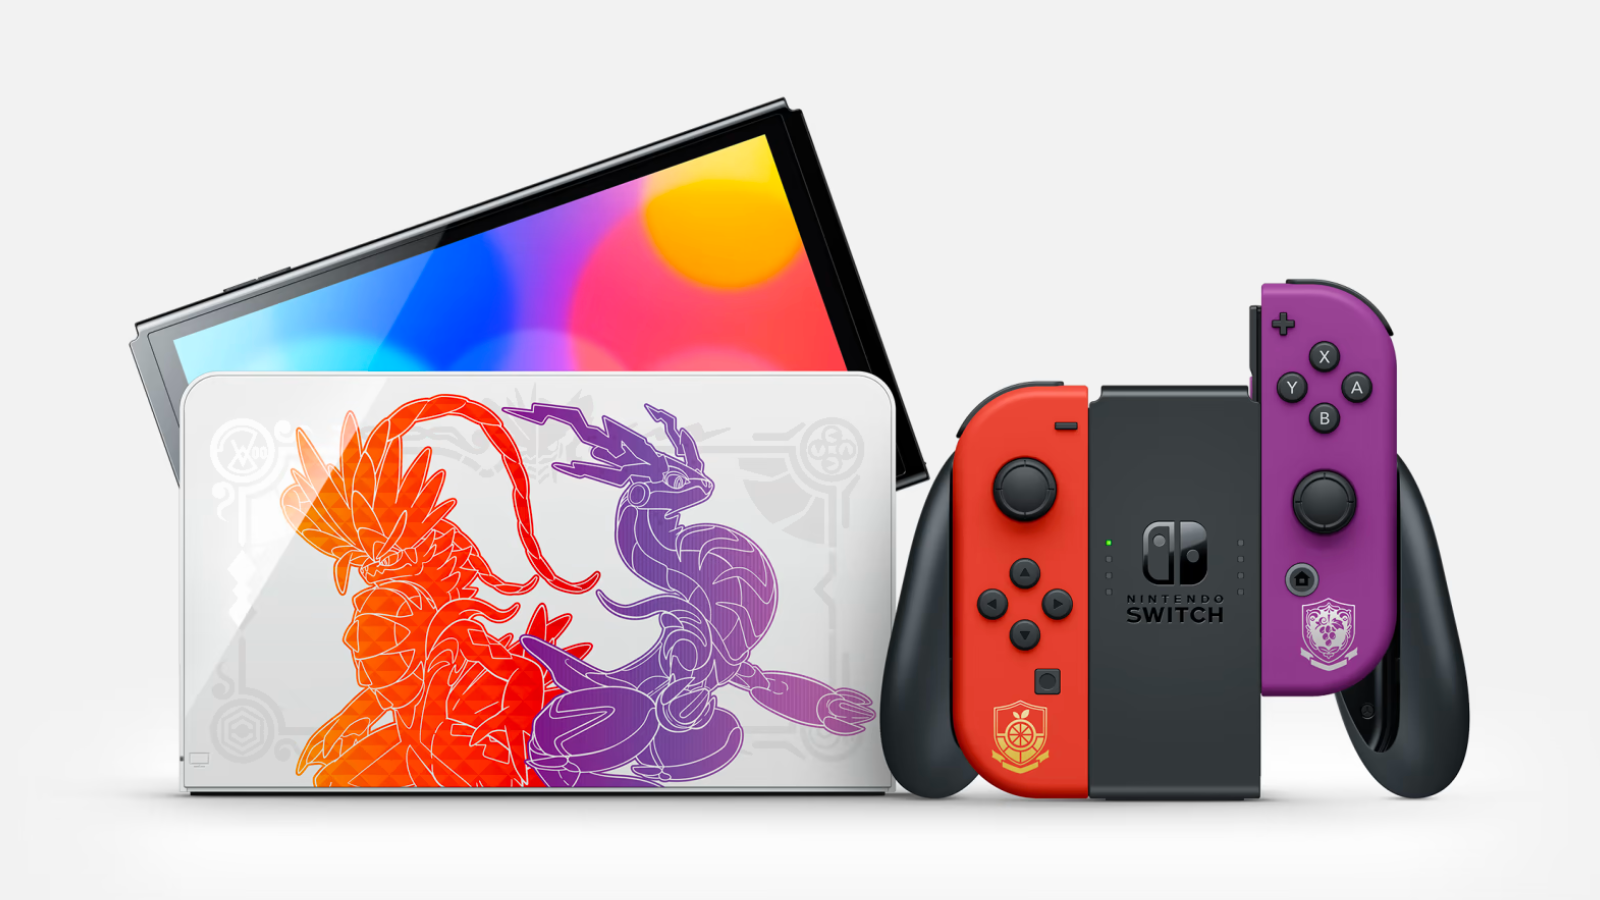 Nintendo’s new Pokémon Scarlet & Violet Edition OLED Switch is available for pre-order now